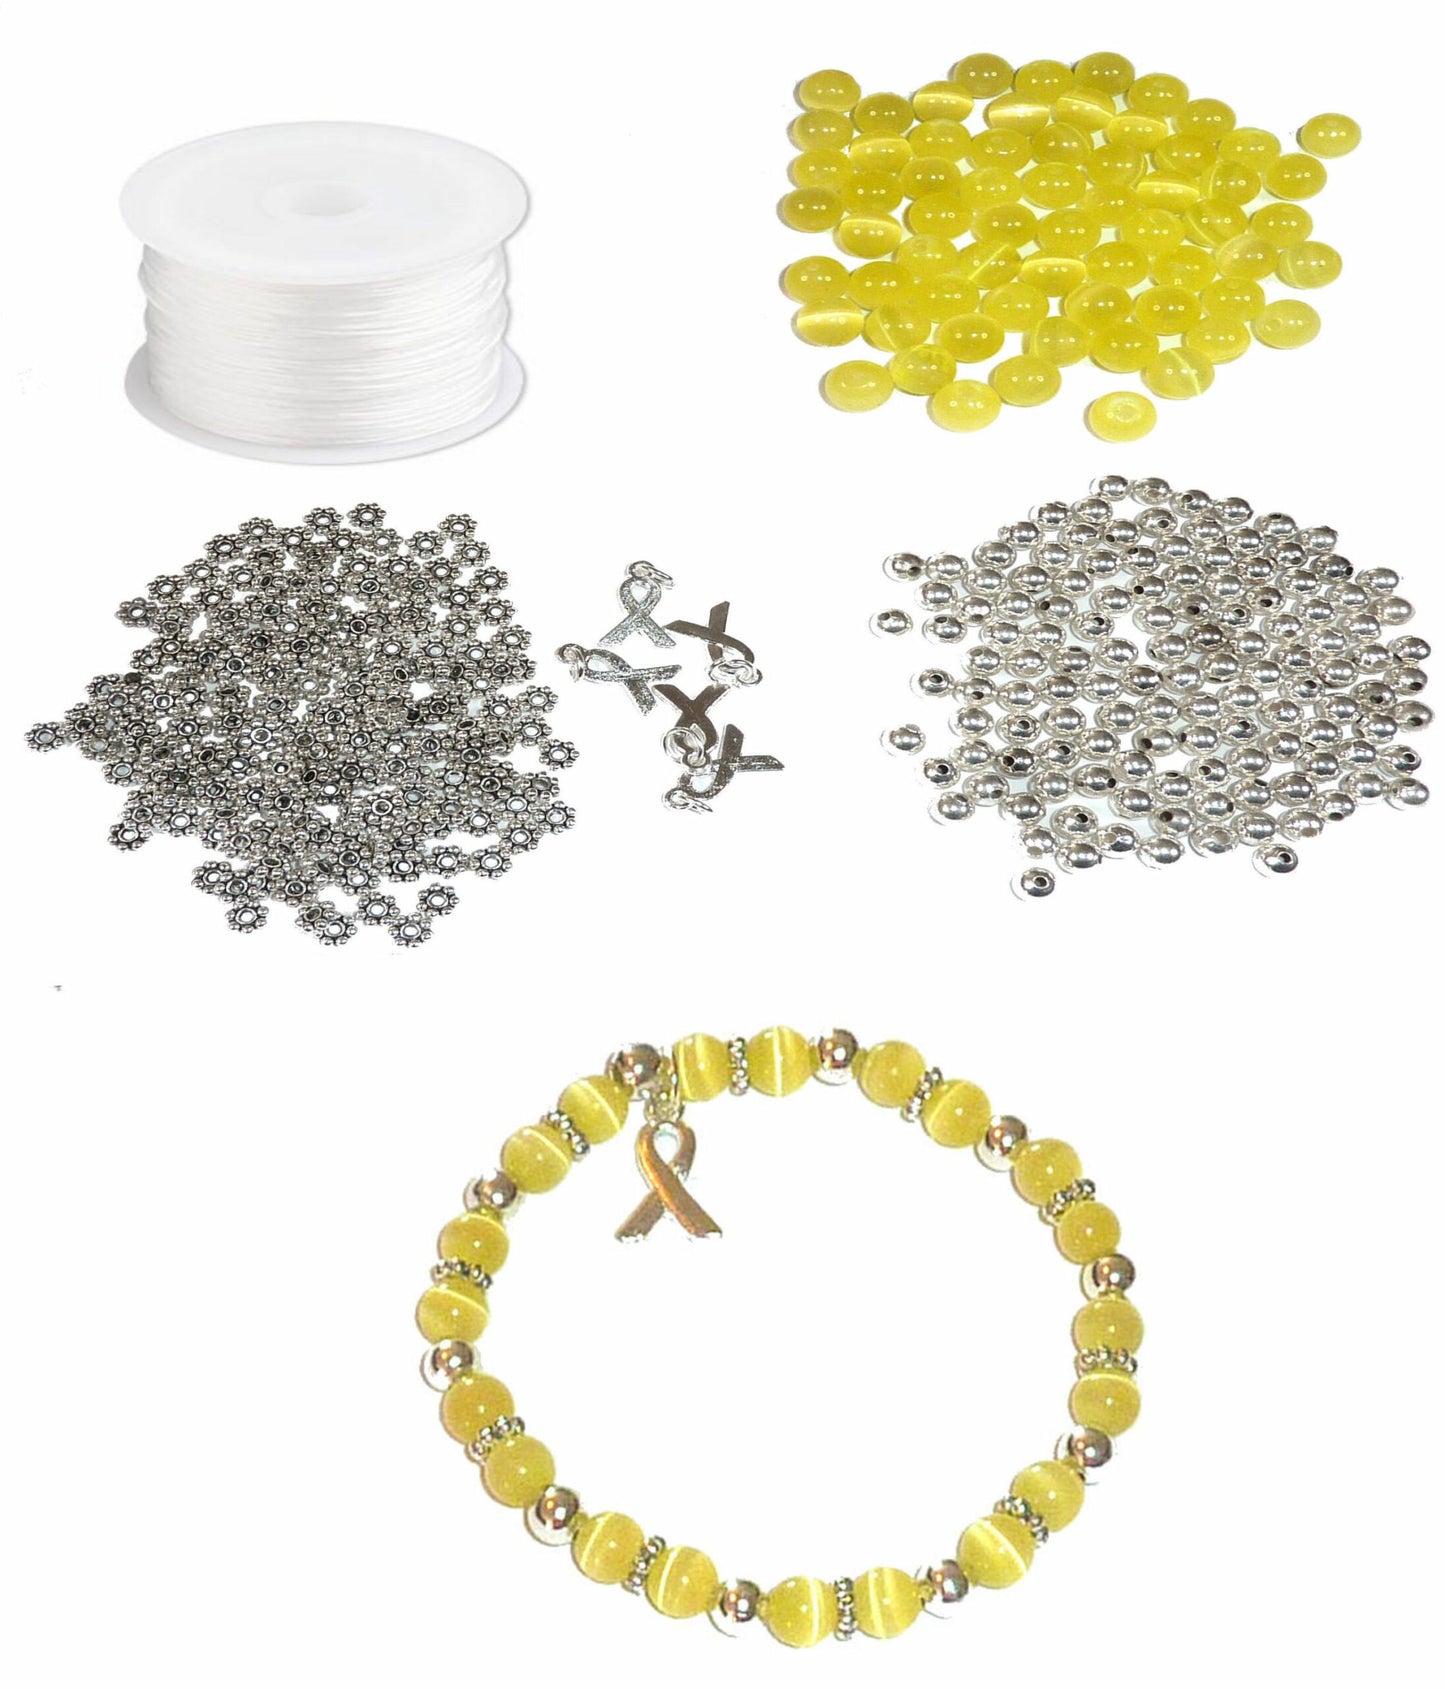 DIY Kit, Everything You Need to Make Cancer Awareness Bracelets, Uses Stretch Cord, Great for Fundraising Makes 5 - Yellow (Bladder & Sarcoma)